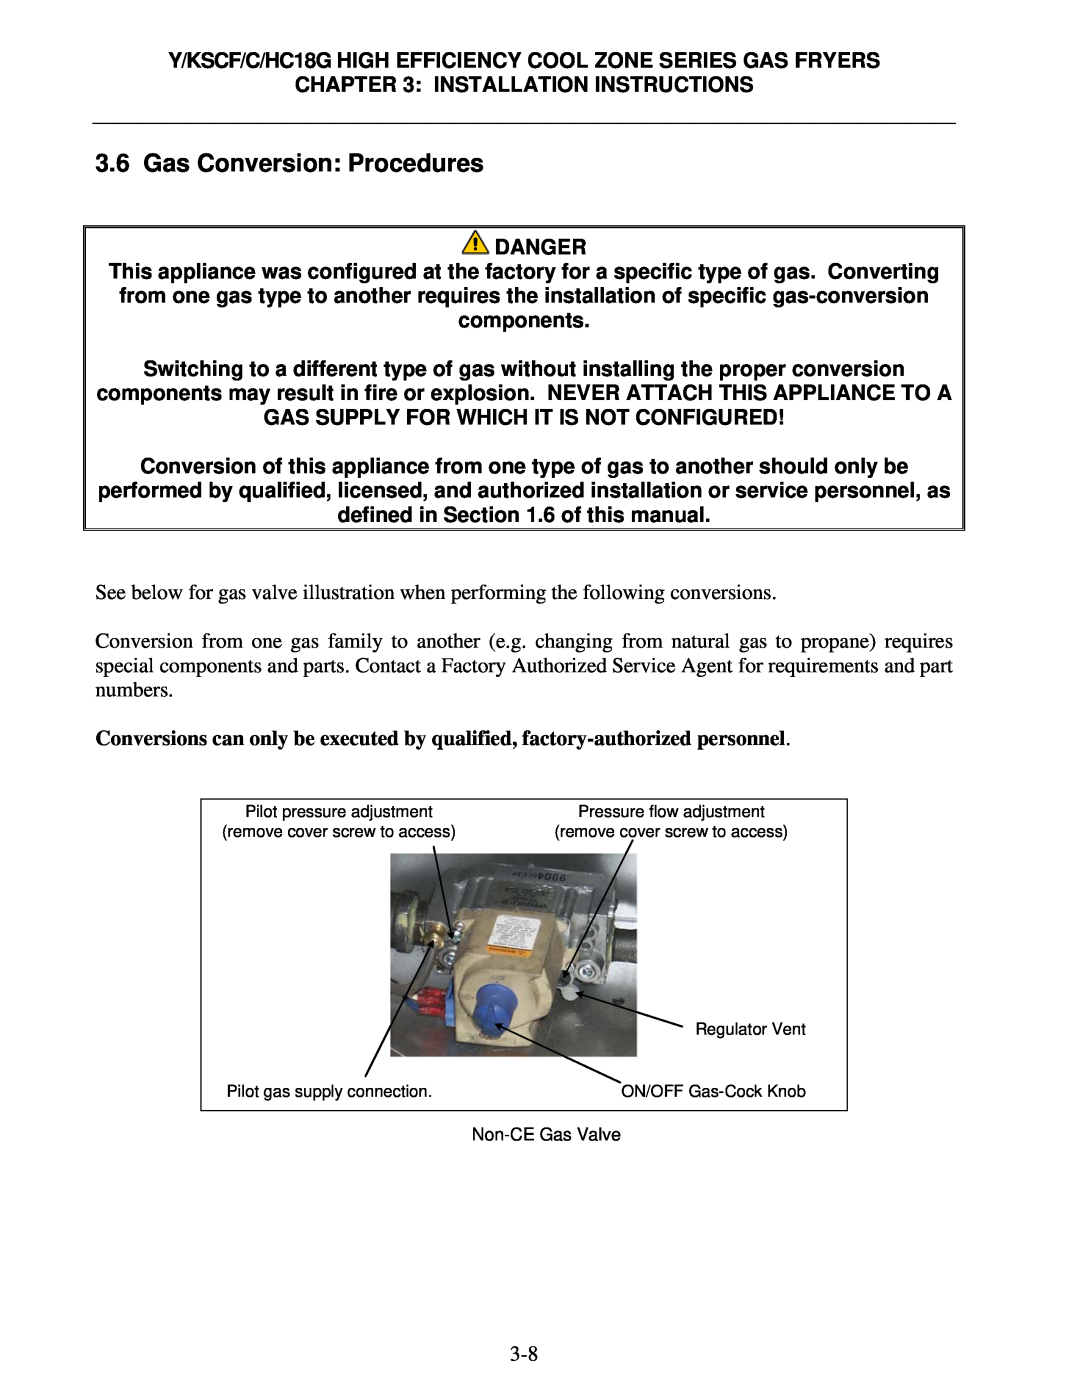 Frymaster Y/KSCF/C/HC18G Gas Conversion Procedures, Gas Supply For Which It Is Not Configured, Installation Instructions 